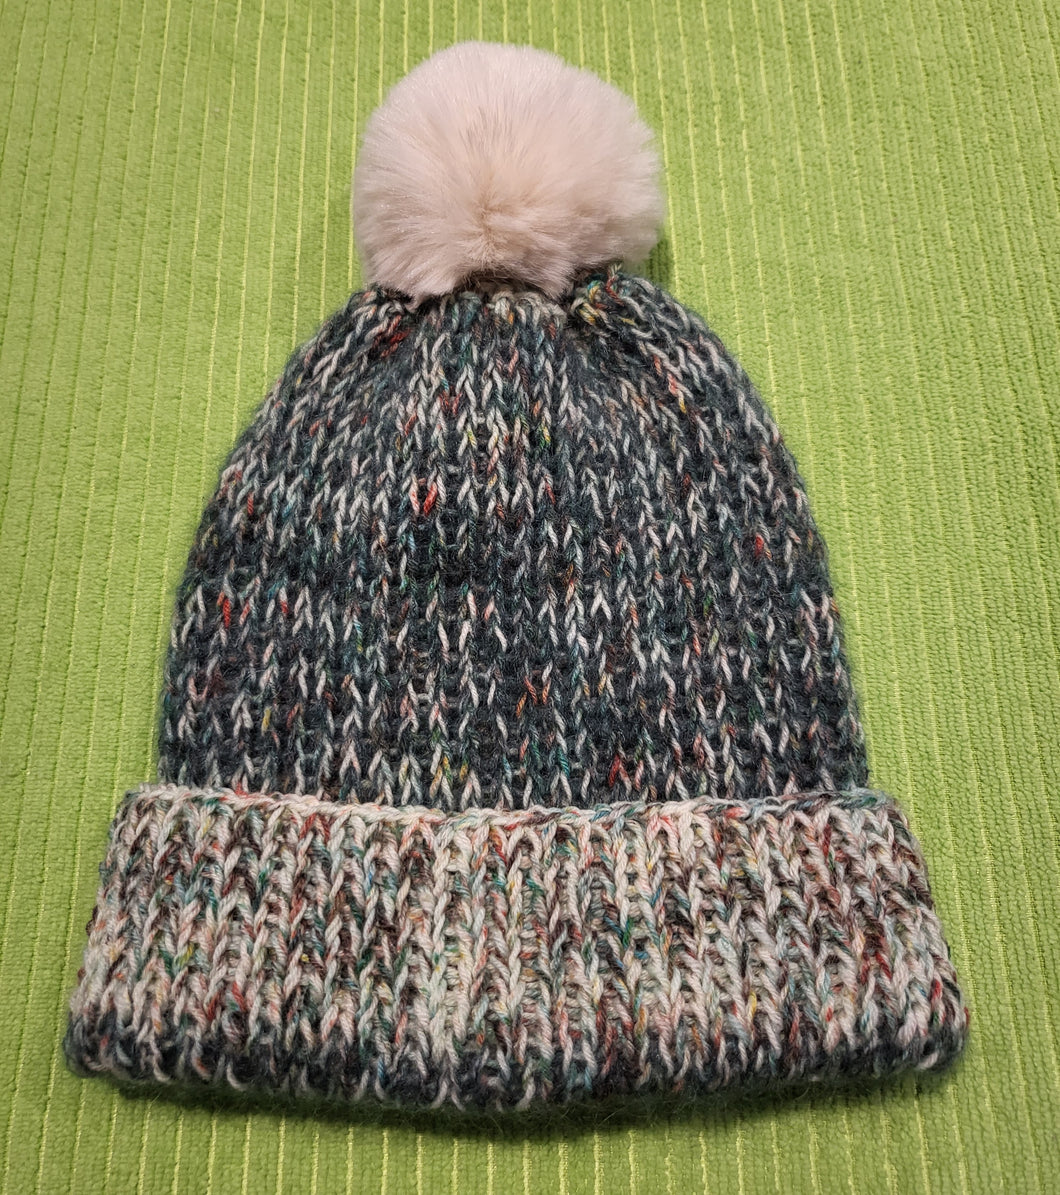 Beanie - green and cream with speckles of colour